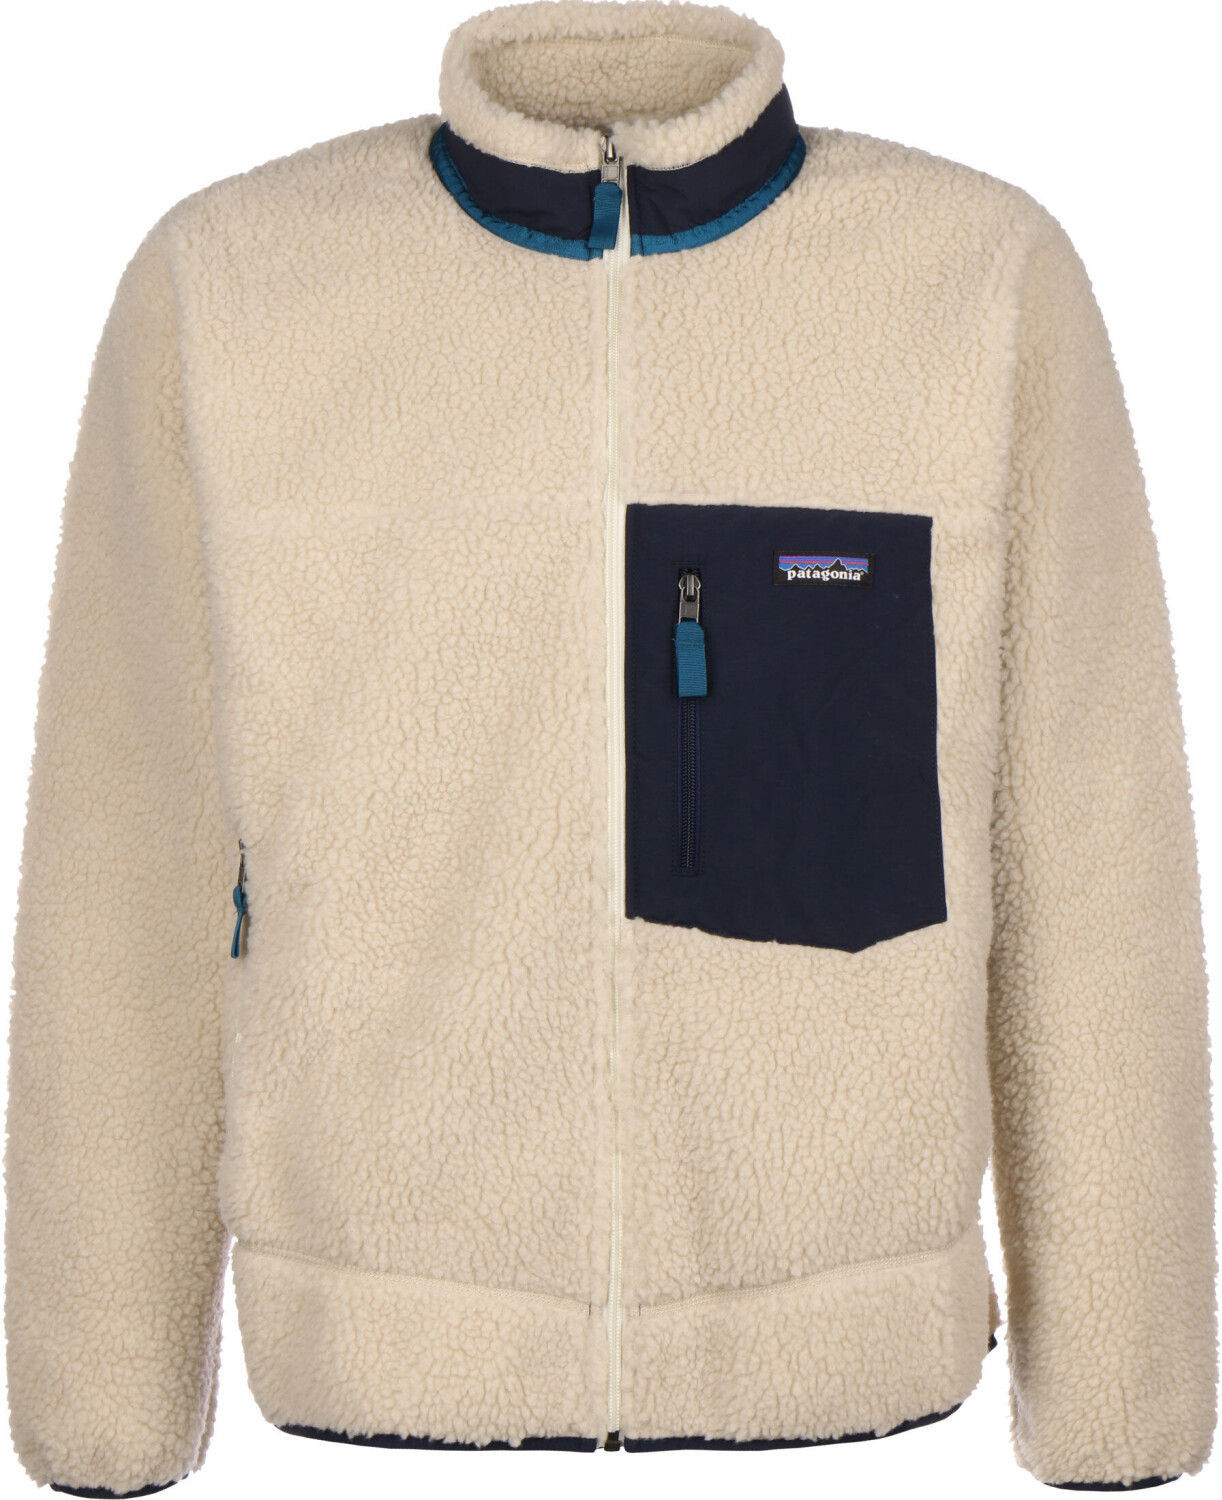 Buy Patagonia Men's Classic Retro-X Fleece Jacket natural from £143.12 ...